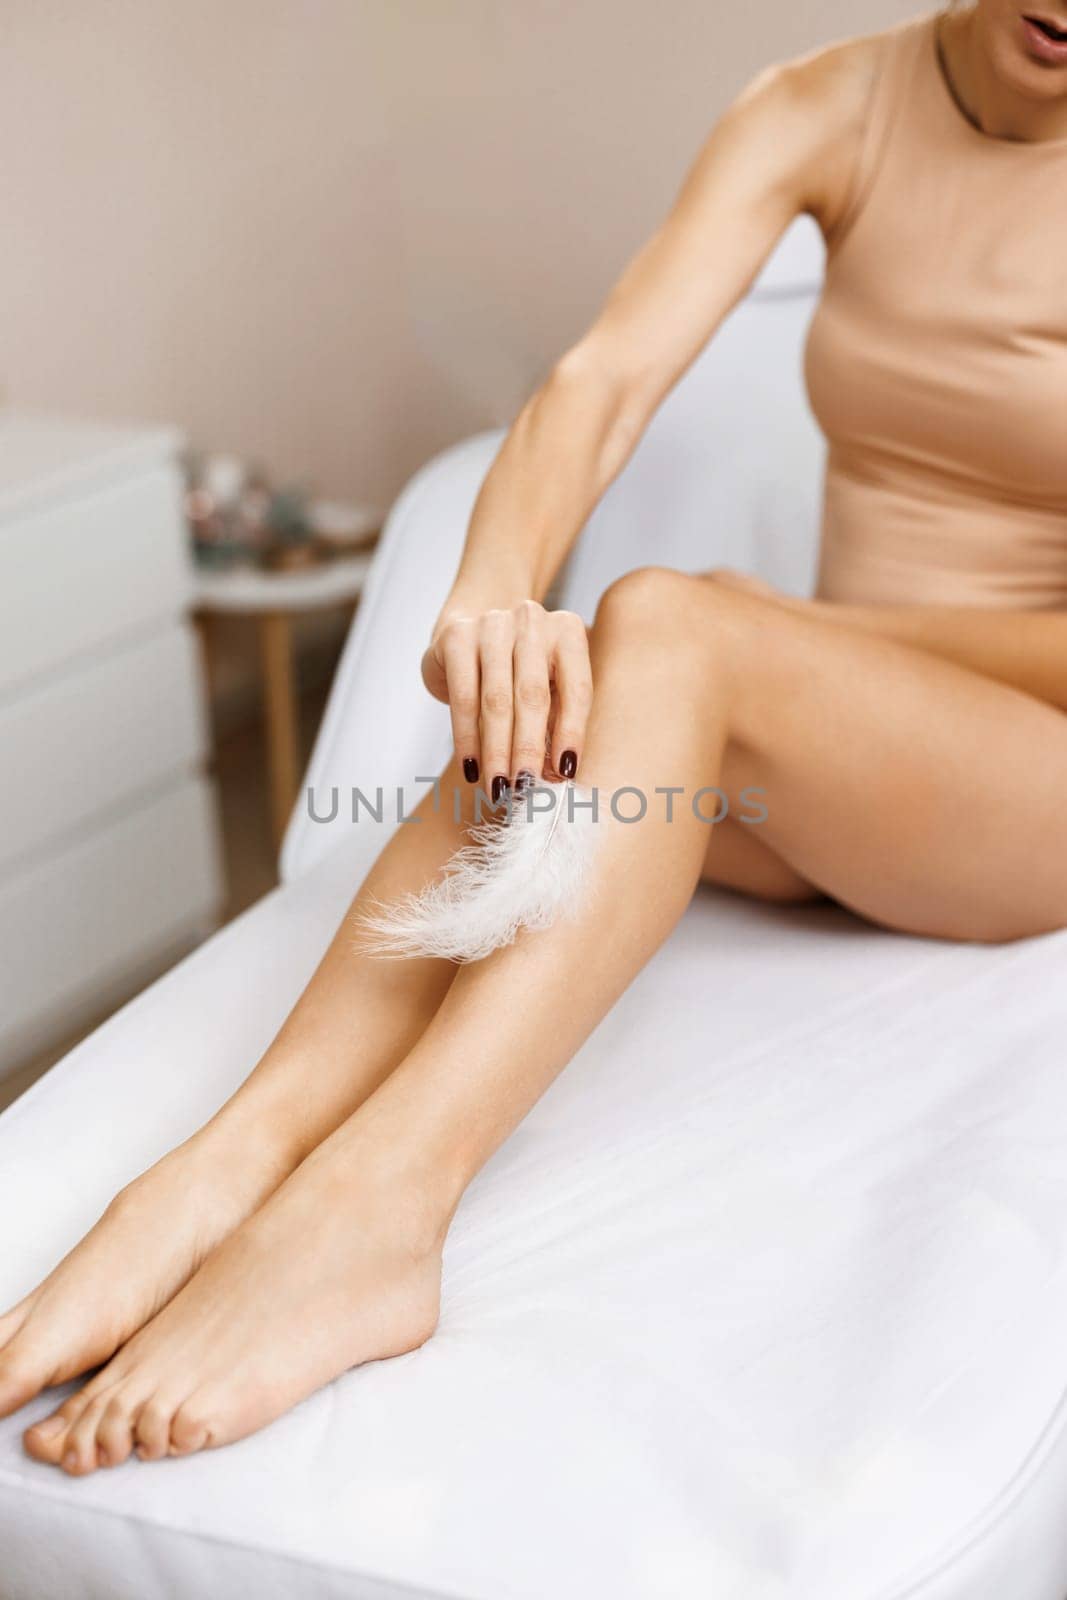 Woman touches her legs with white feather. Concepts of skin care and hair removal treatment. Female feet with smooth skin and soft ostrich feathe.